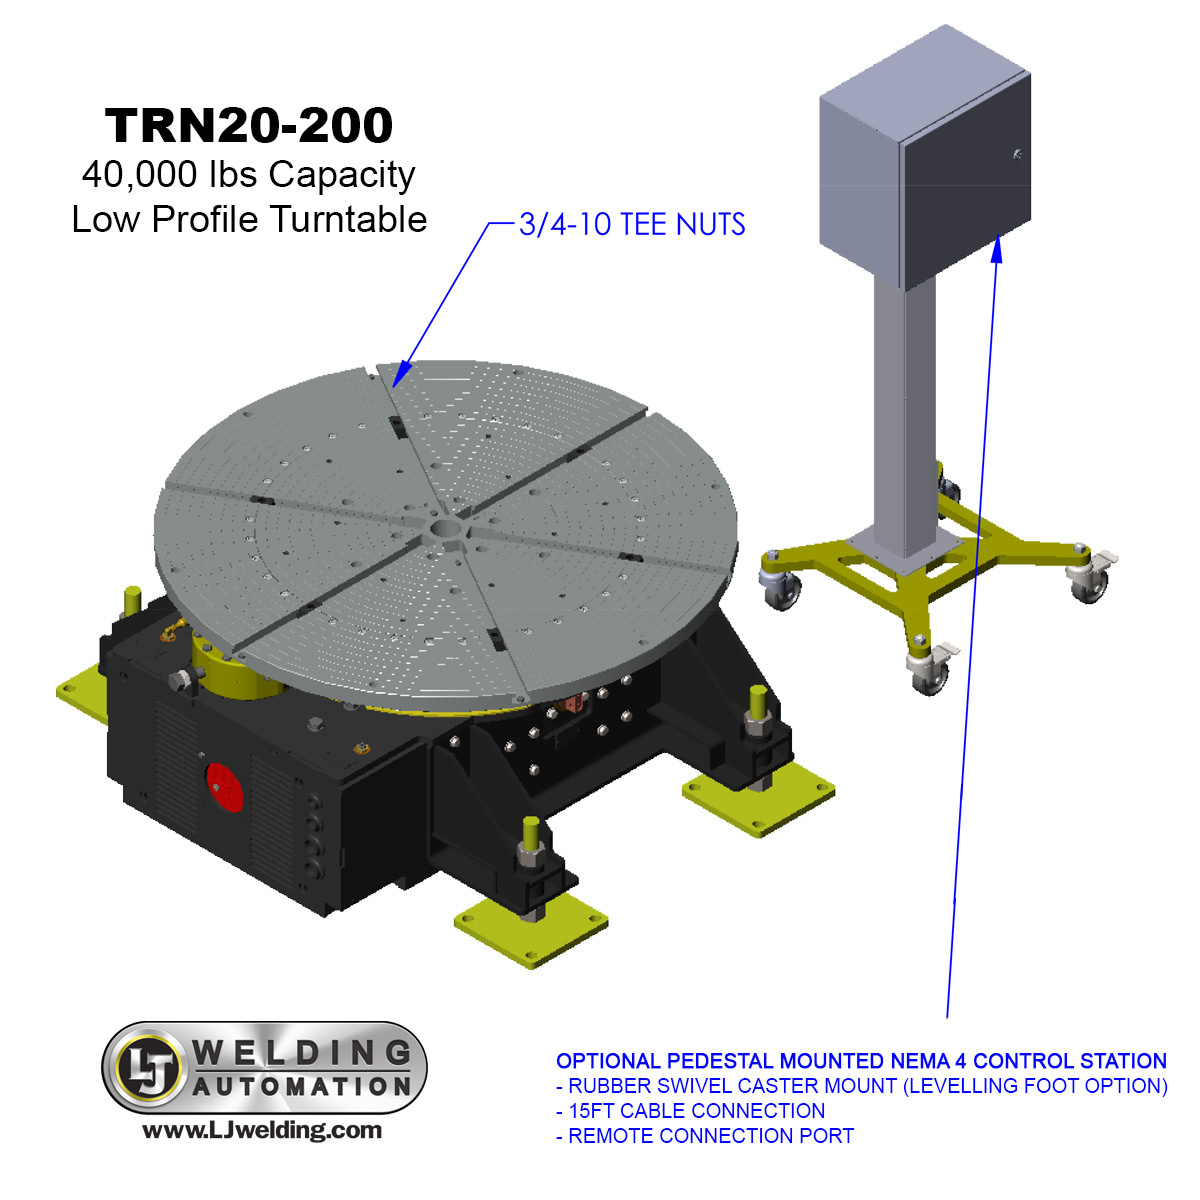 03-40000lbs-Low-Profile-Turntable